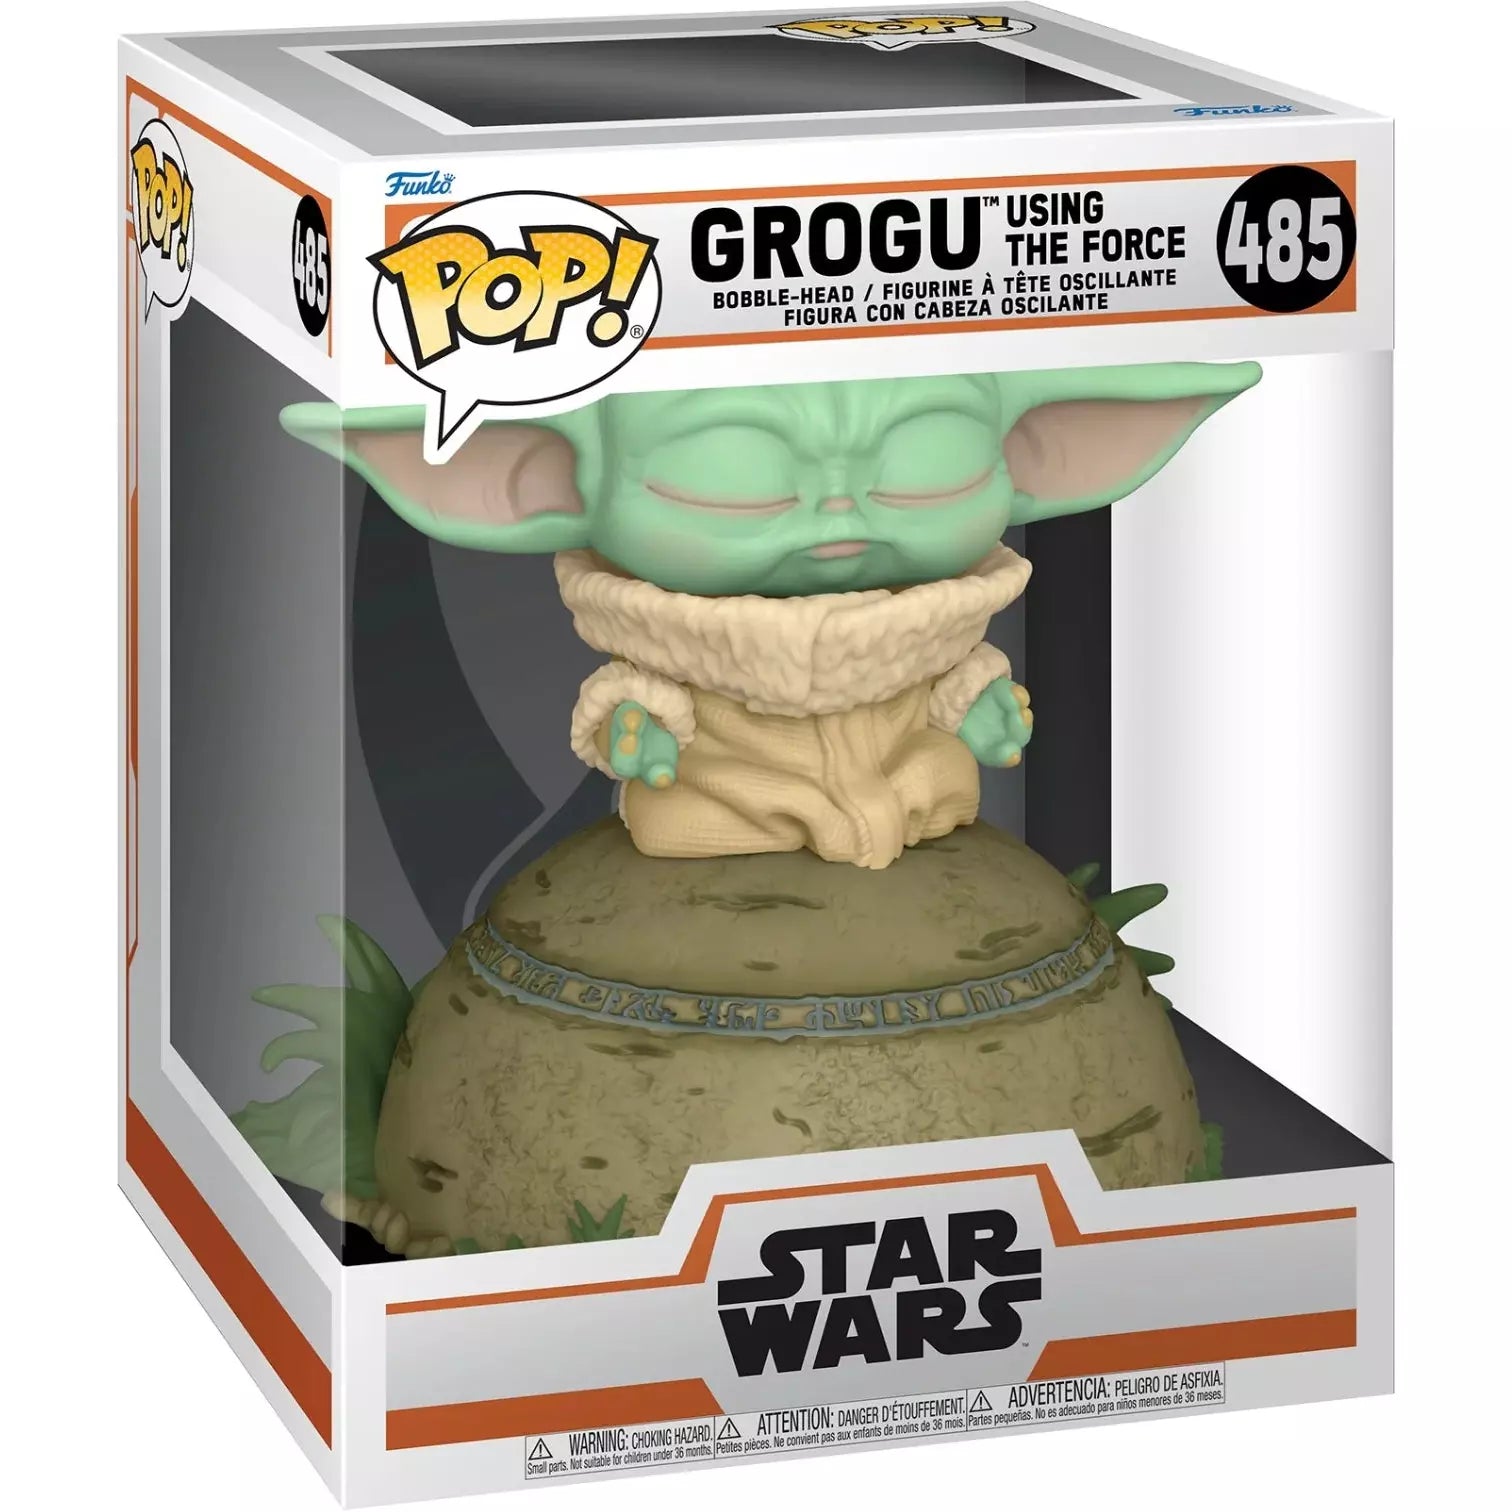 Funko pop Star Wars: The Mandalorian - Grogu Using The Force (Lights and Sounds) - BumbleToys - 18+, Action Figures, Boys, Deluxe, Funko, Pre-Order, star wars